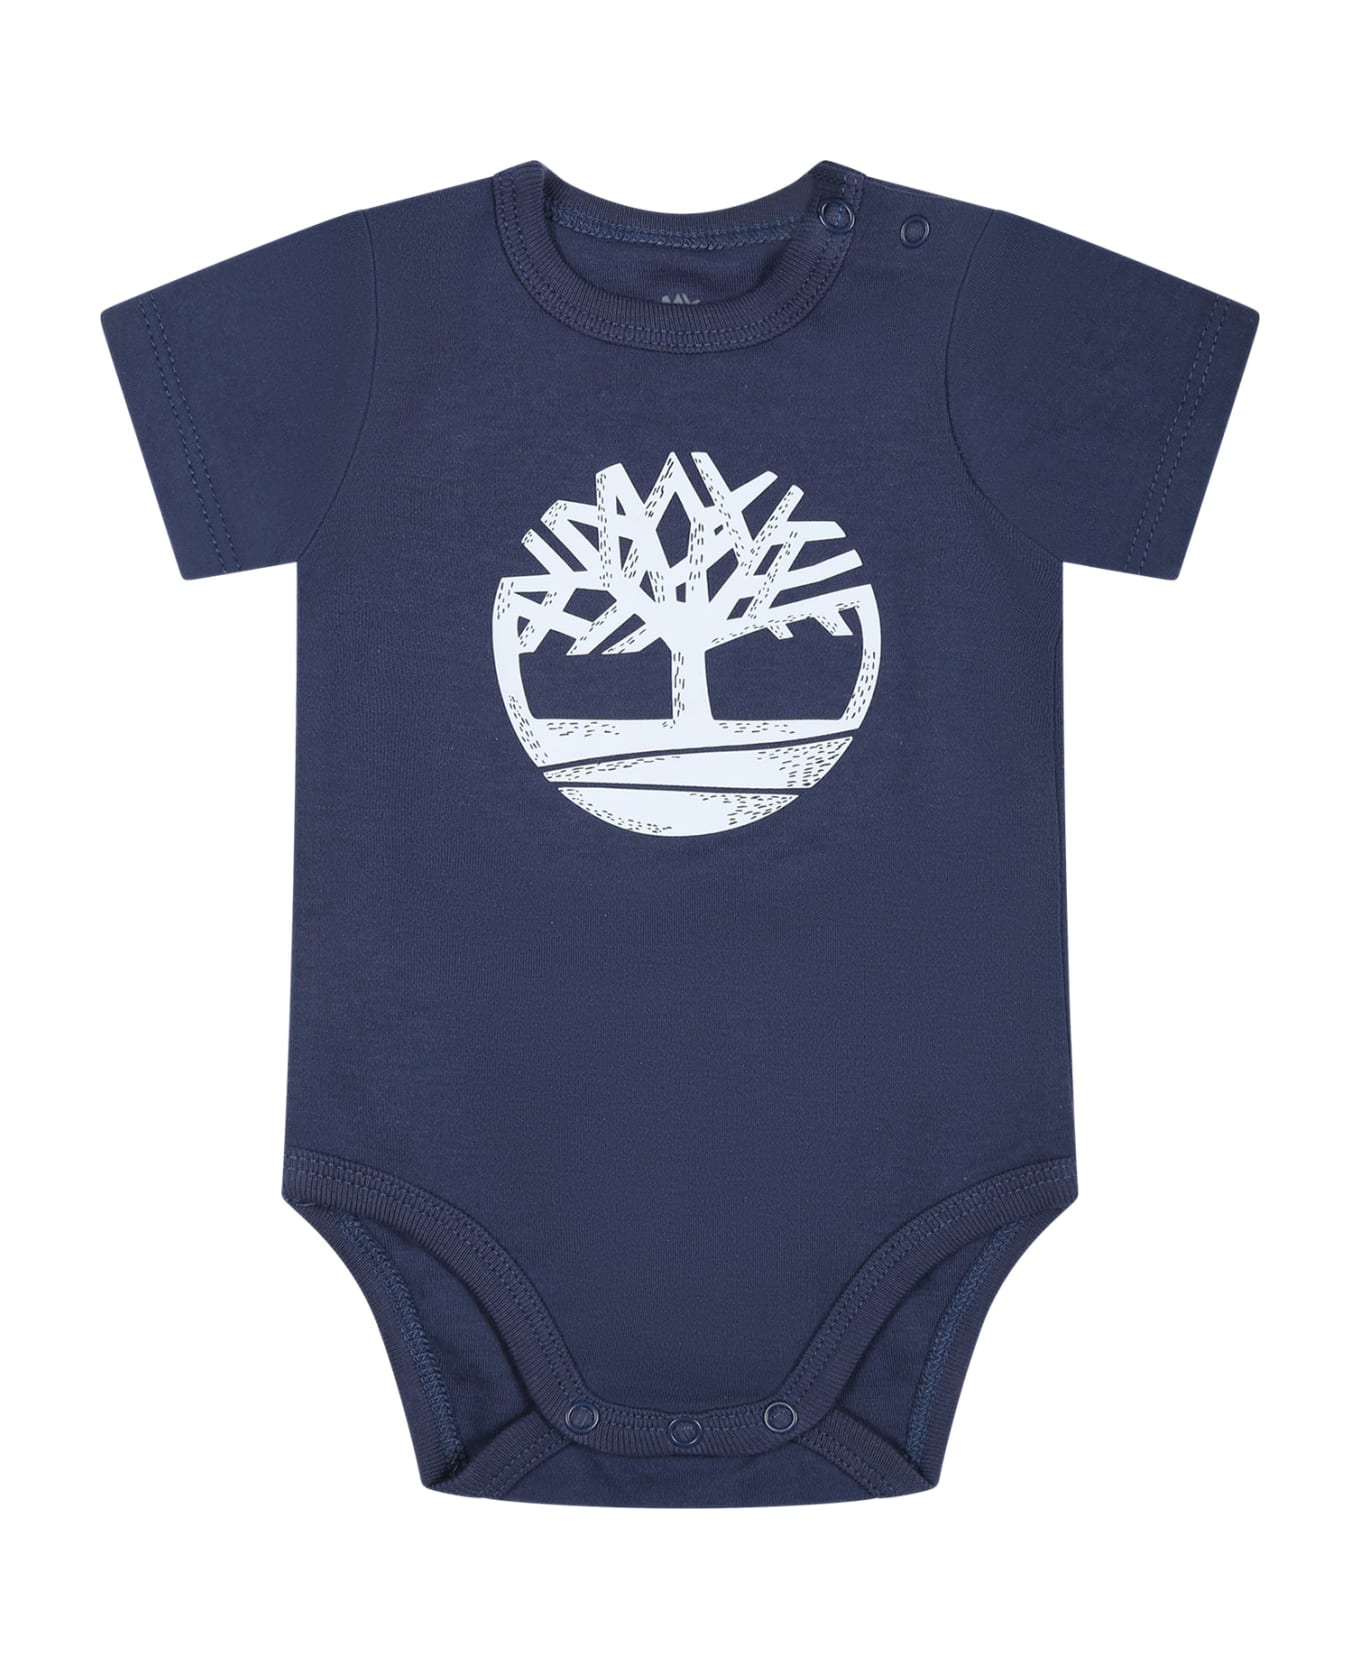 Timberland Blue Bodysuit Set For Baby Boy With Logo - Blue